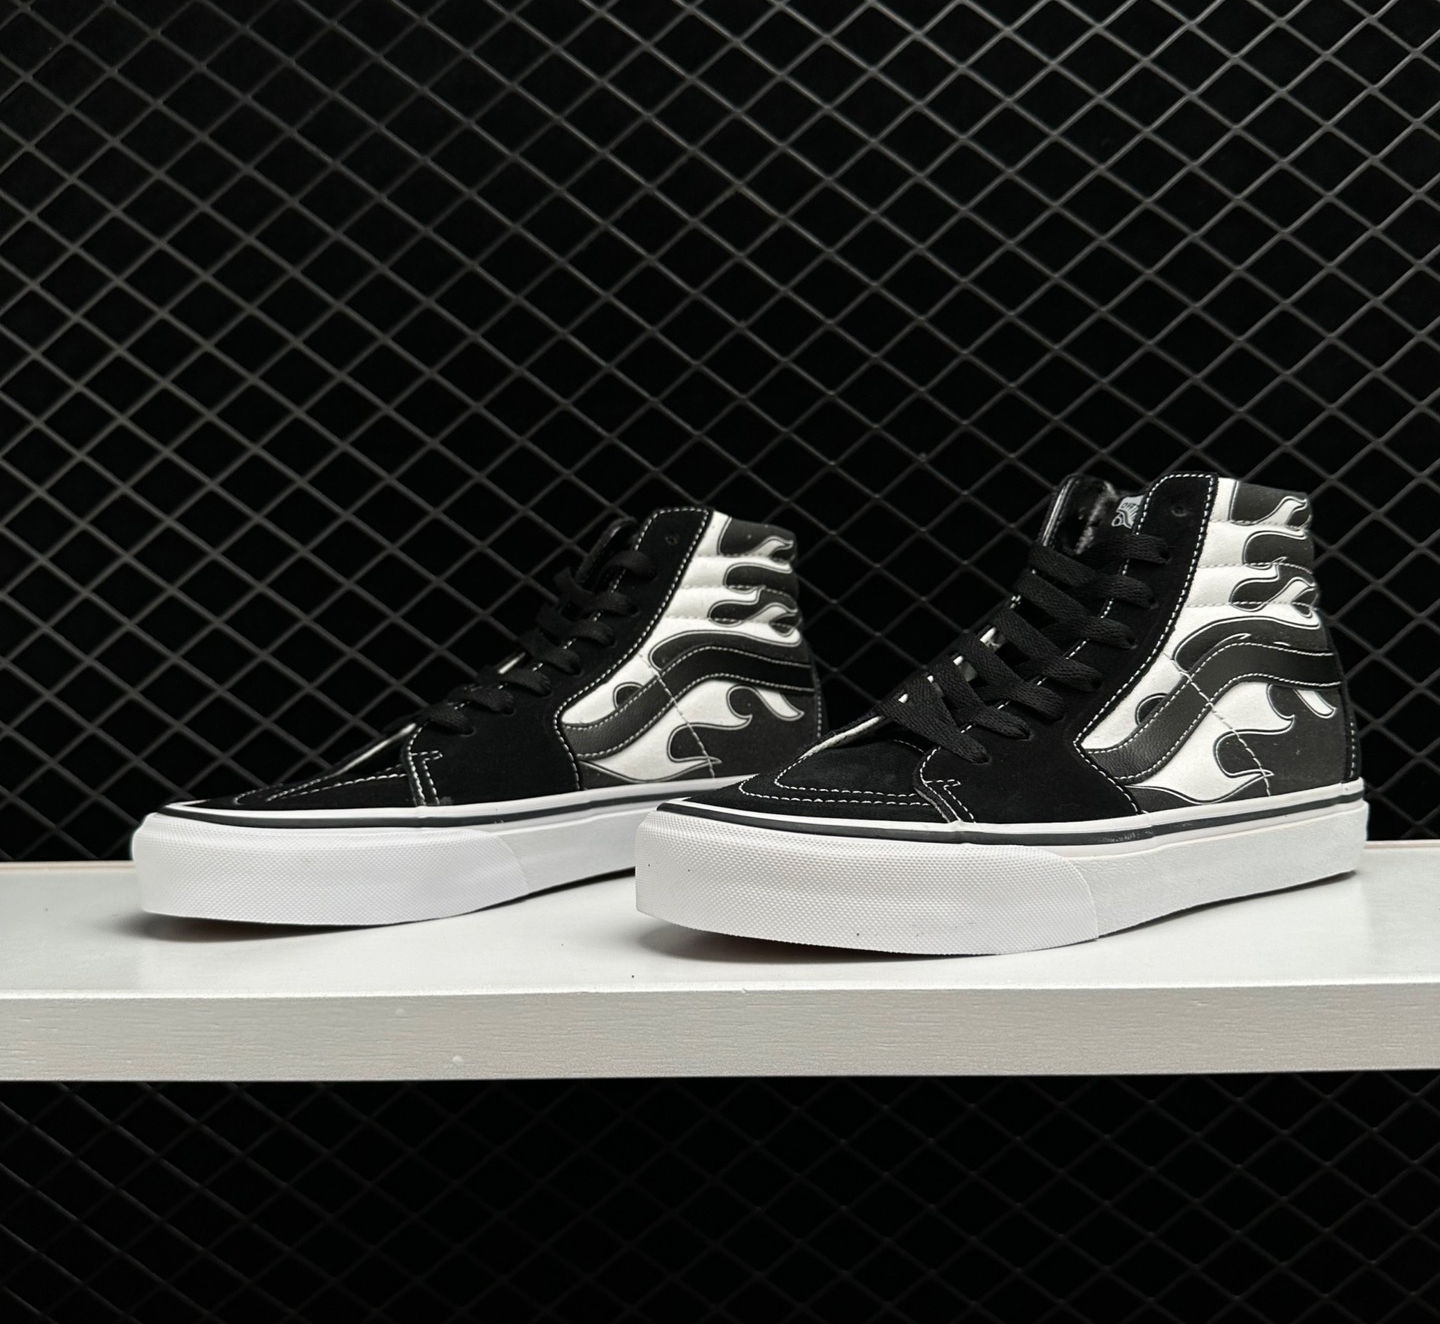 Vans Sk8-Hi 'Flame - Black' VN0A32QGK681 - Classic and Edgy Skate Shoes